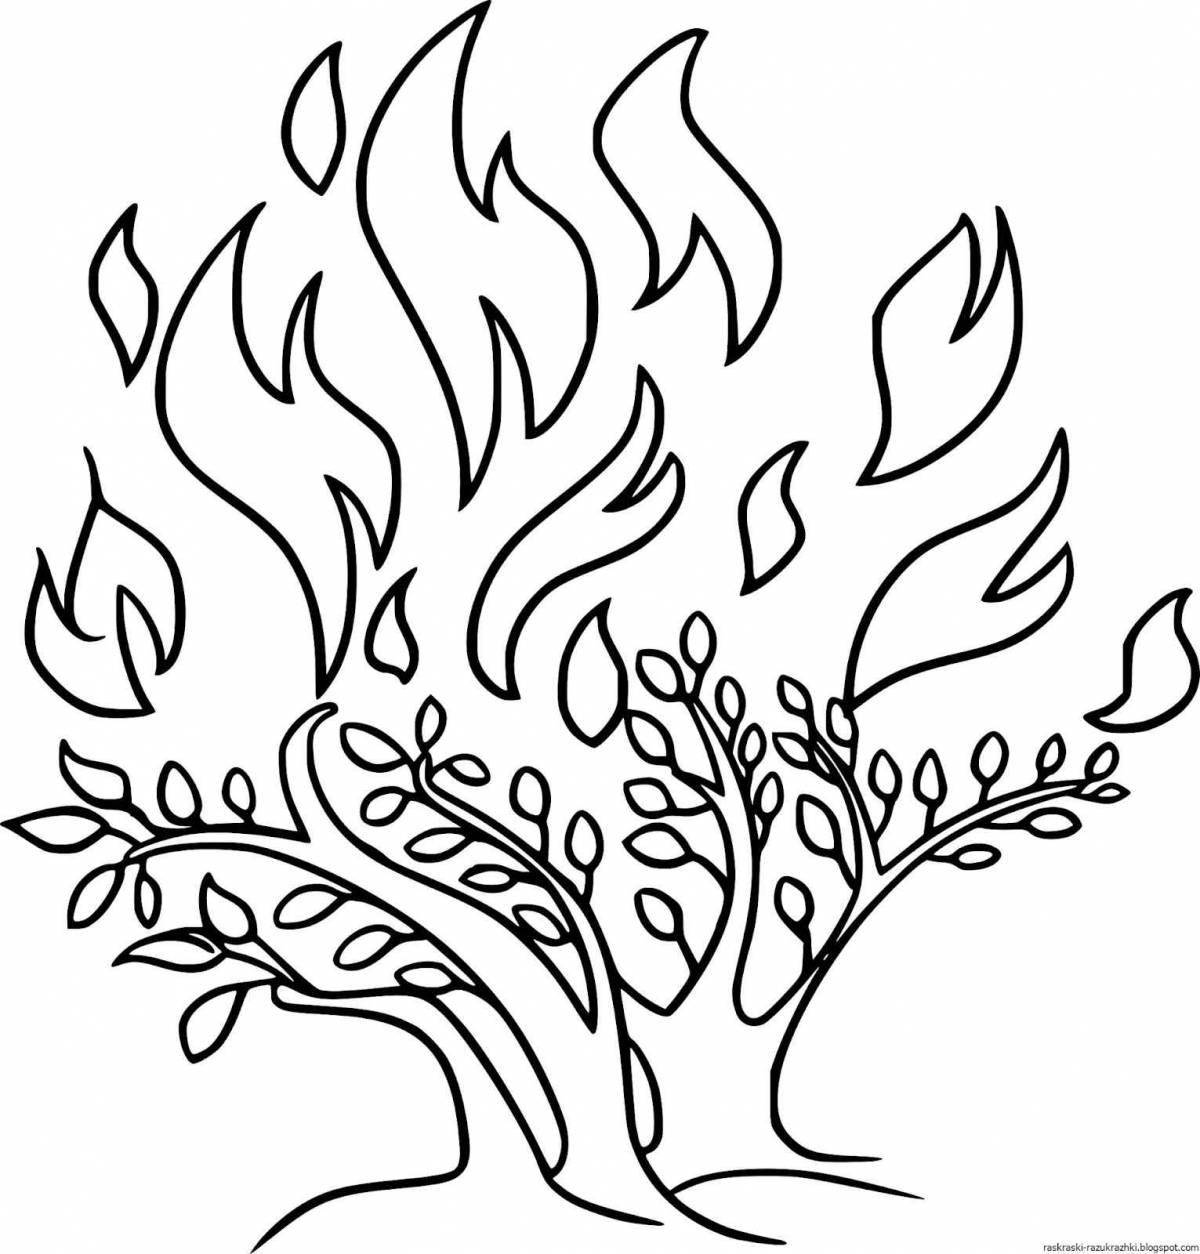 Coloring book glowing forest fire